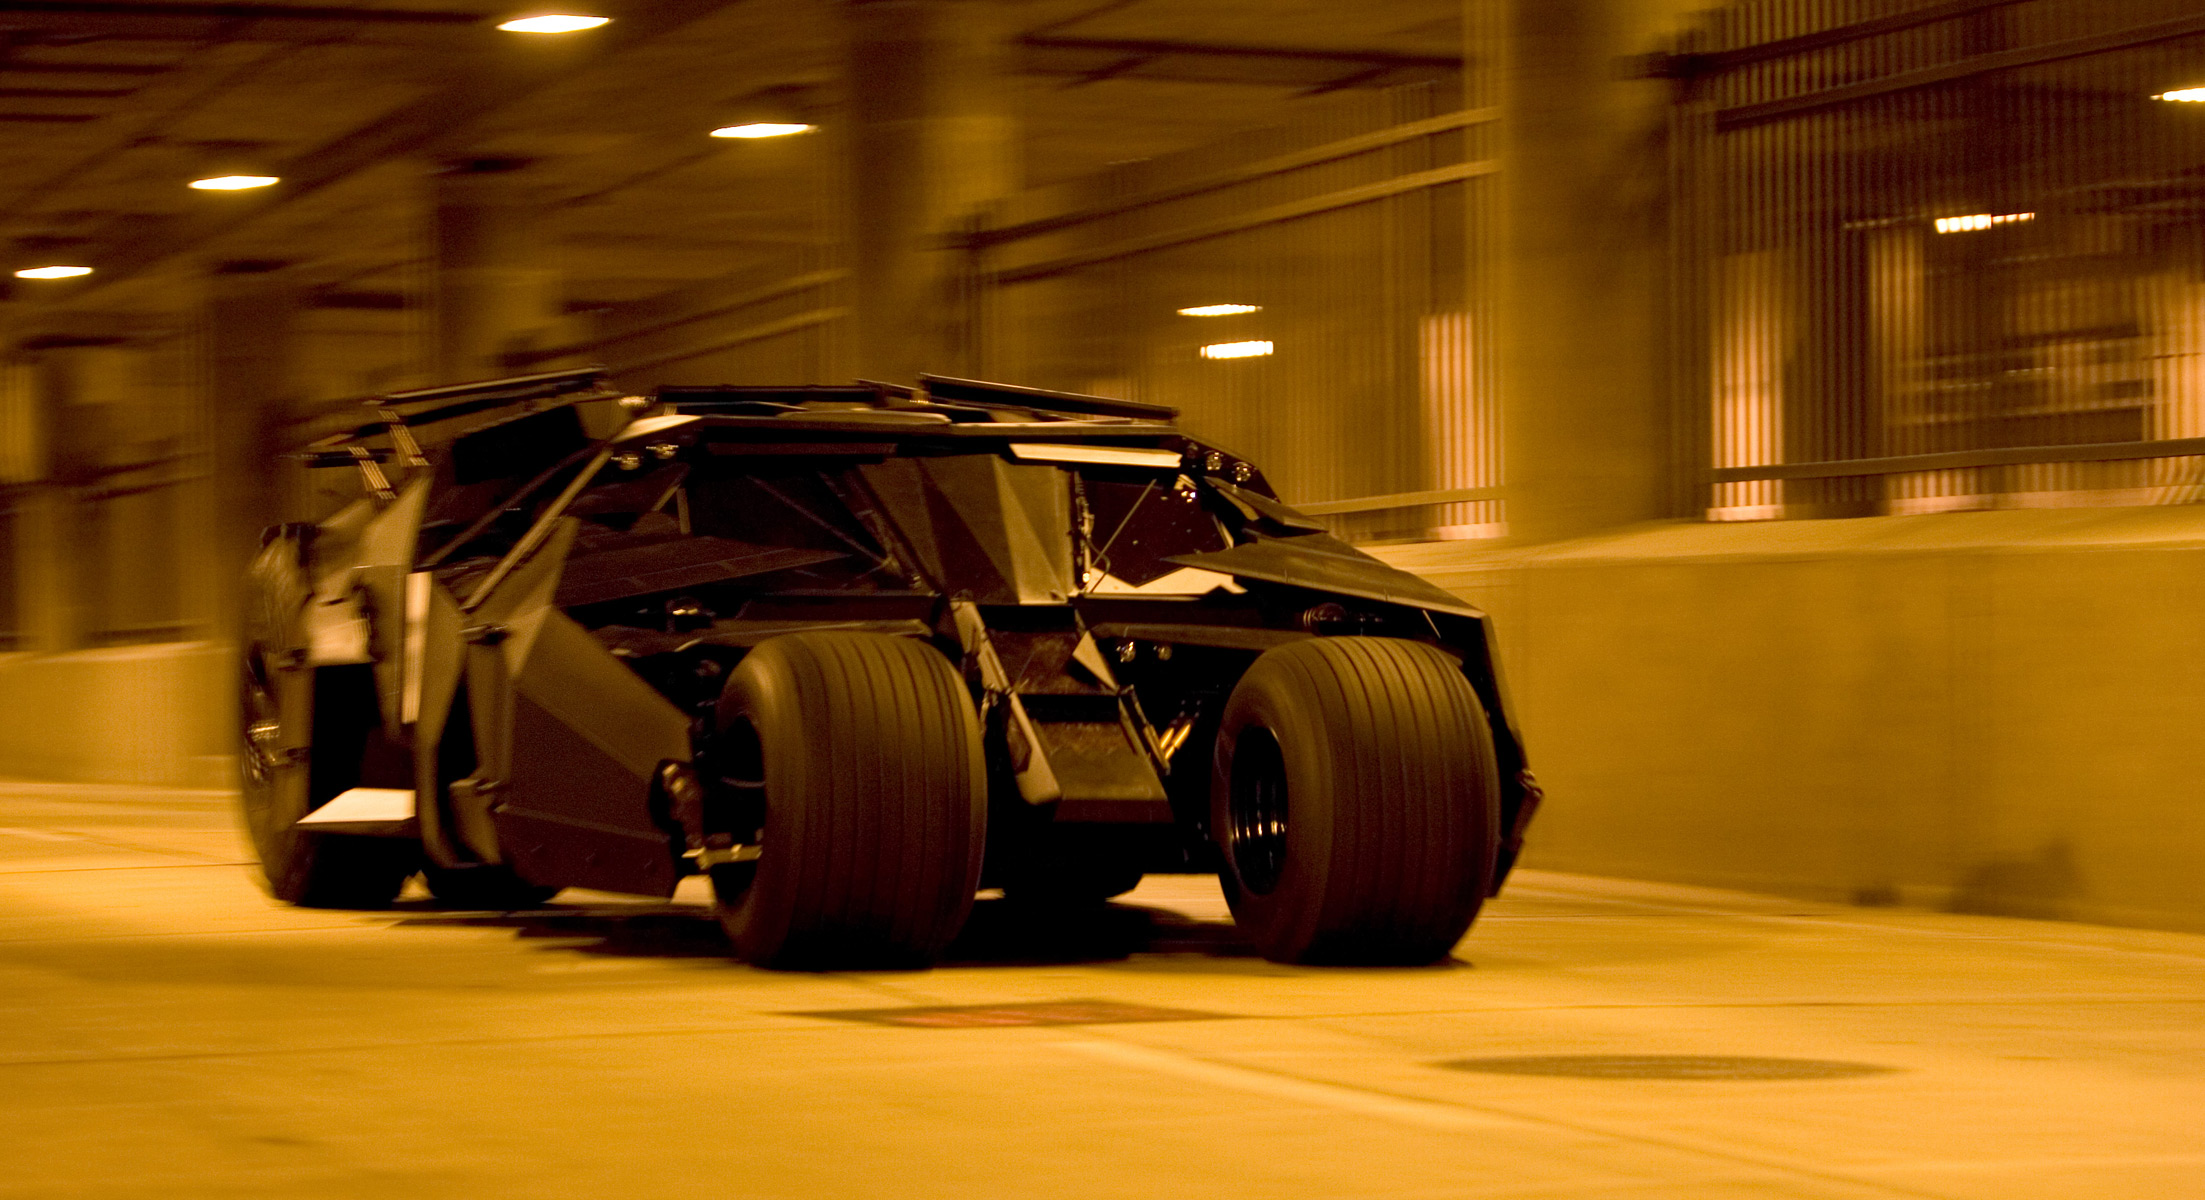 <p>Like the Bond cars, Batmobiles have transcended for many generations. But the militaristic Batmobile Tumbler first appeared in Christopher Nolan's <i>Batman Begins</i> and <i>The Dark Knight</i>. The beefy 350-cid Chevy V8-cylinder powers the tank-like Tumbler to reach a speed of 60 mph in five seconds.</p> <p>The front tires on this custom Batmobile are mounted to an independent suspension with 30 inches of suspension travel. What makes the Tumbler stand out compared to many movie props these days is that it's a real thing. In no way or form is the car a computer-animated fantasy.</p>